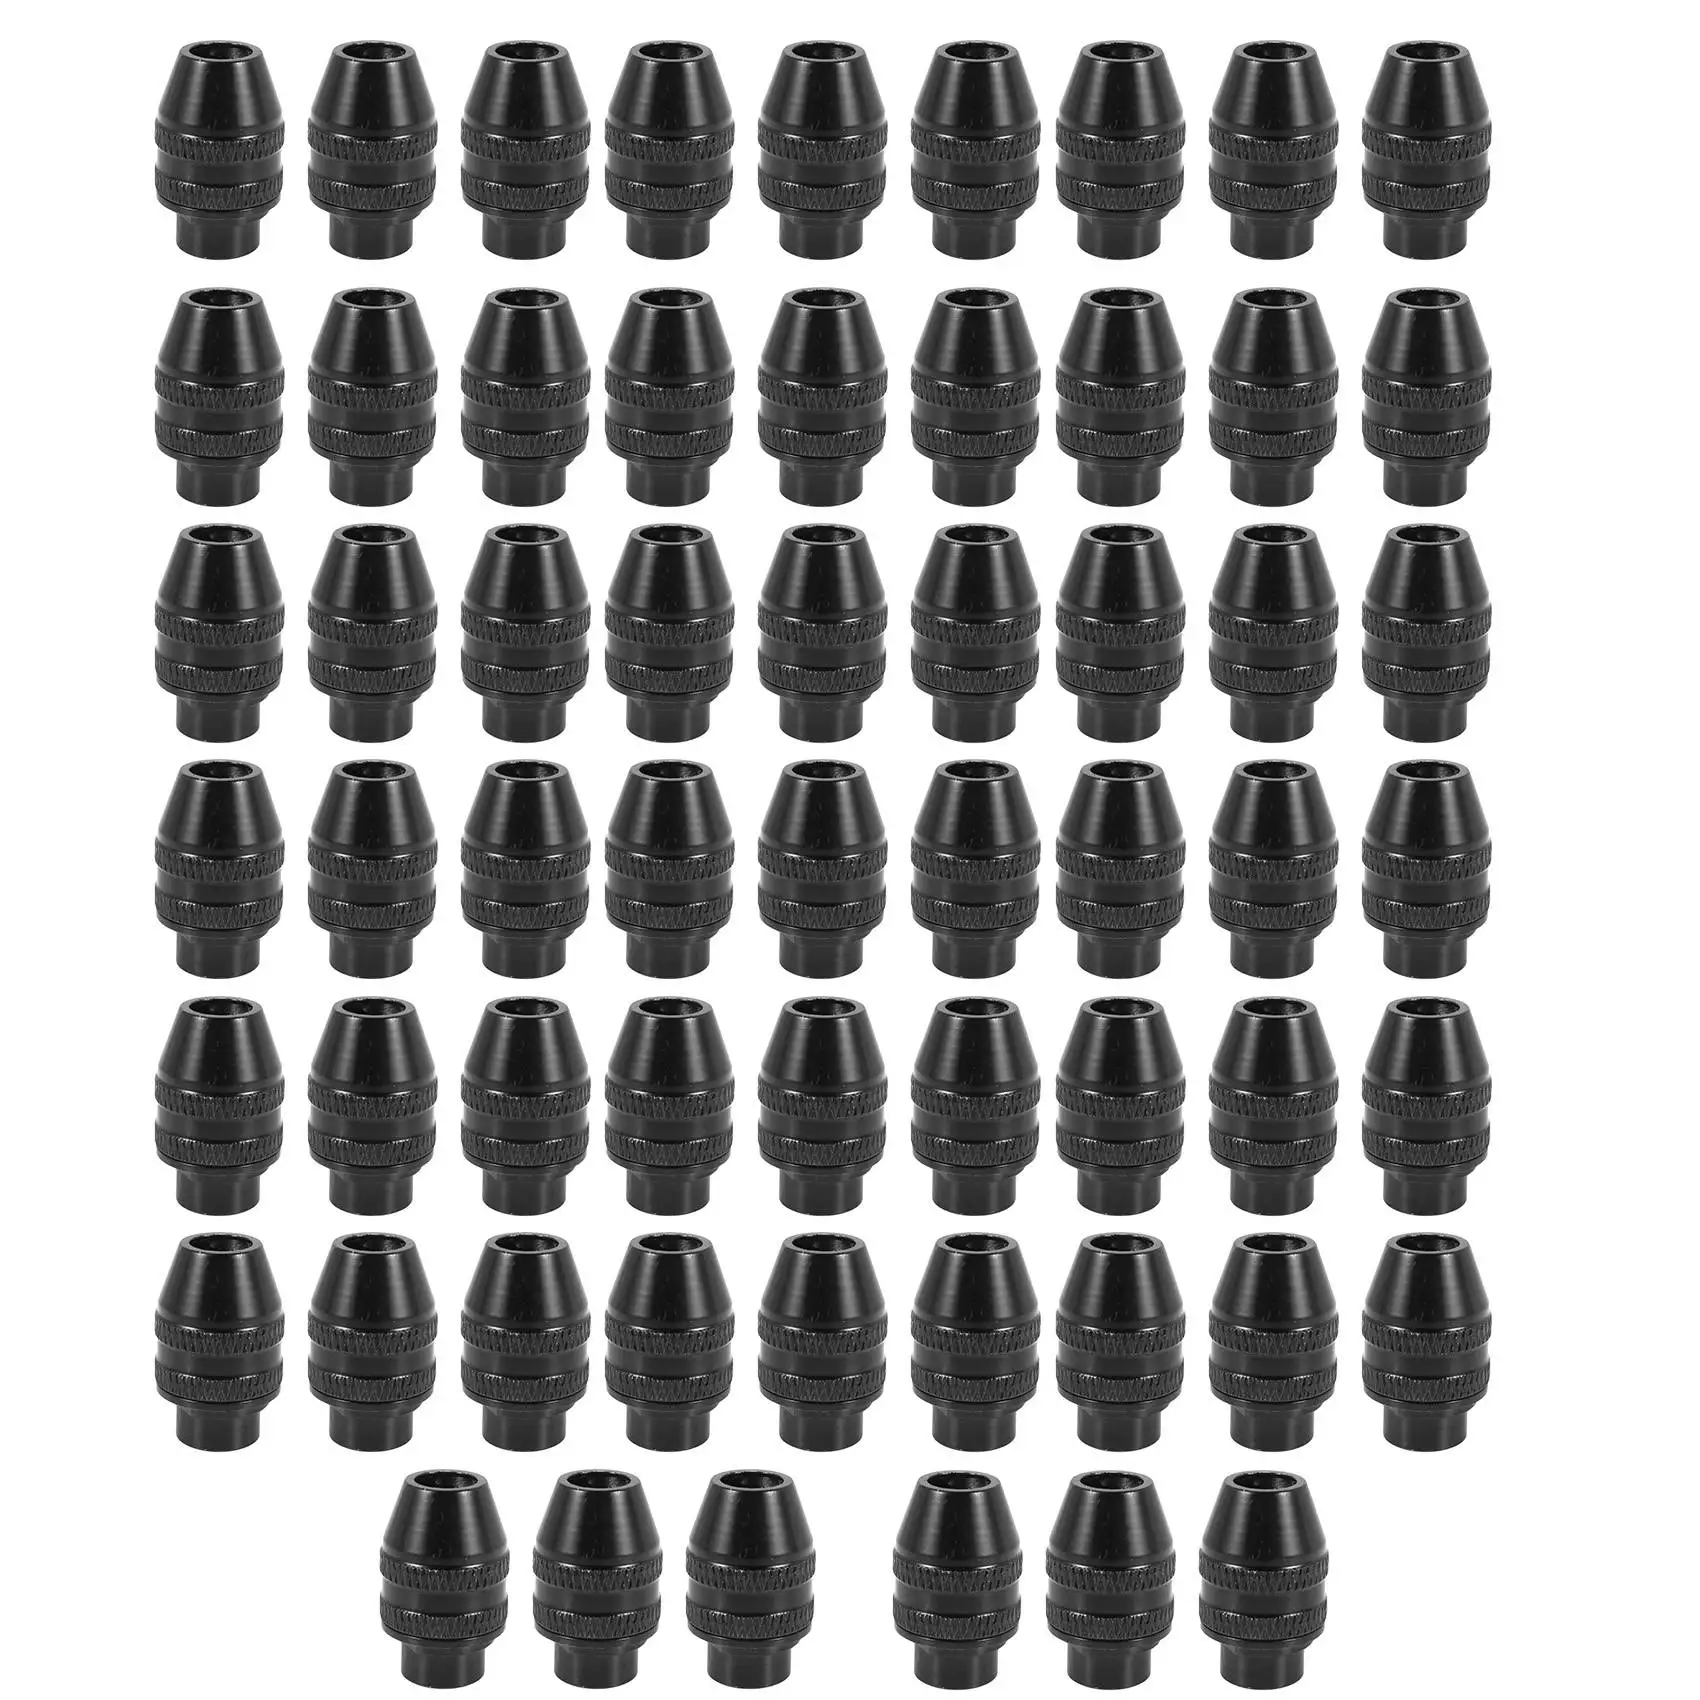 

60Pcs Multi Quick Change Keyless Chuck Universal Chuck Replacement for Dremel 4486 Rotary Tools 3000 4000 7700 8200